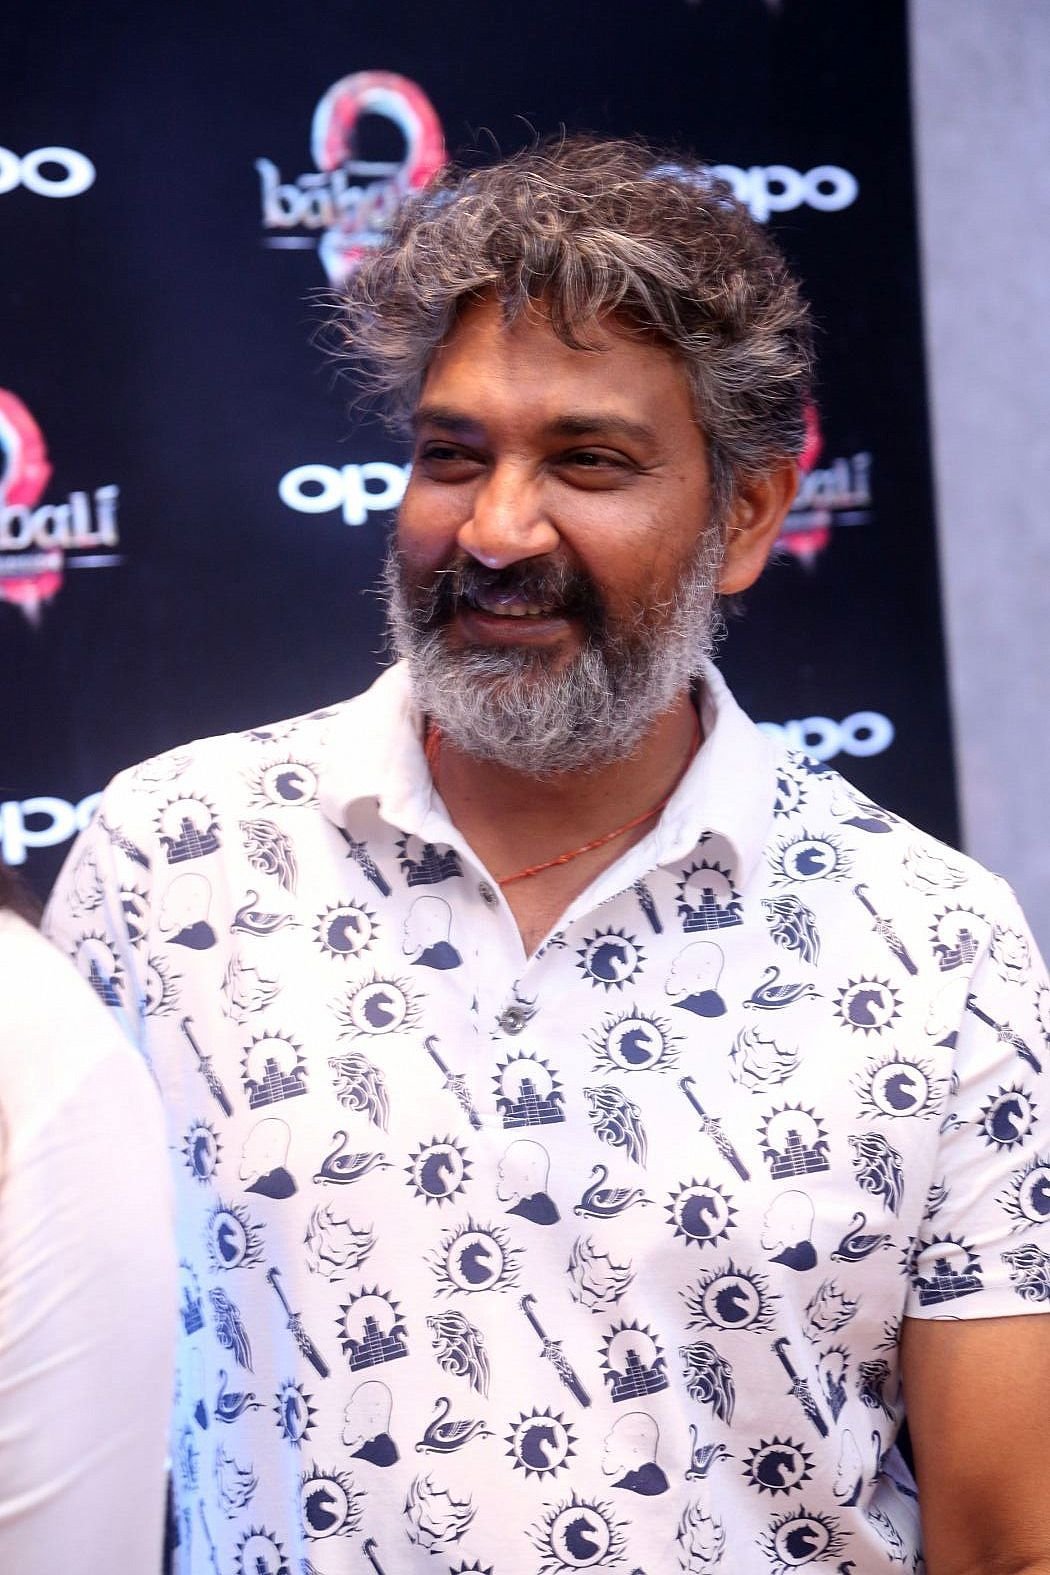 S. S. Rajamouli - The World of Baahubali Press Meet Photos | Picture 1495139